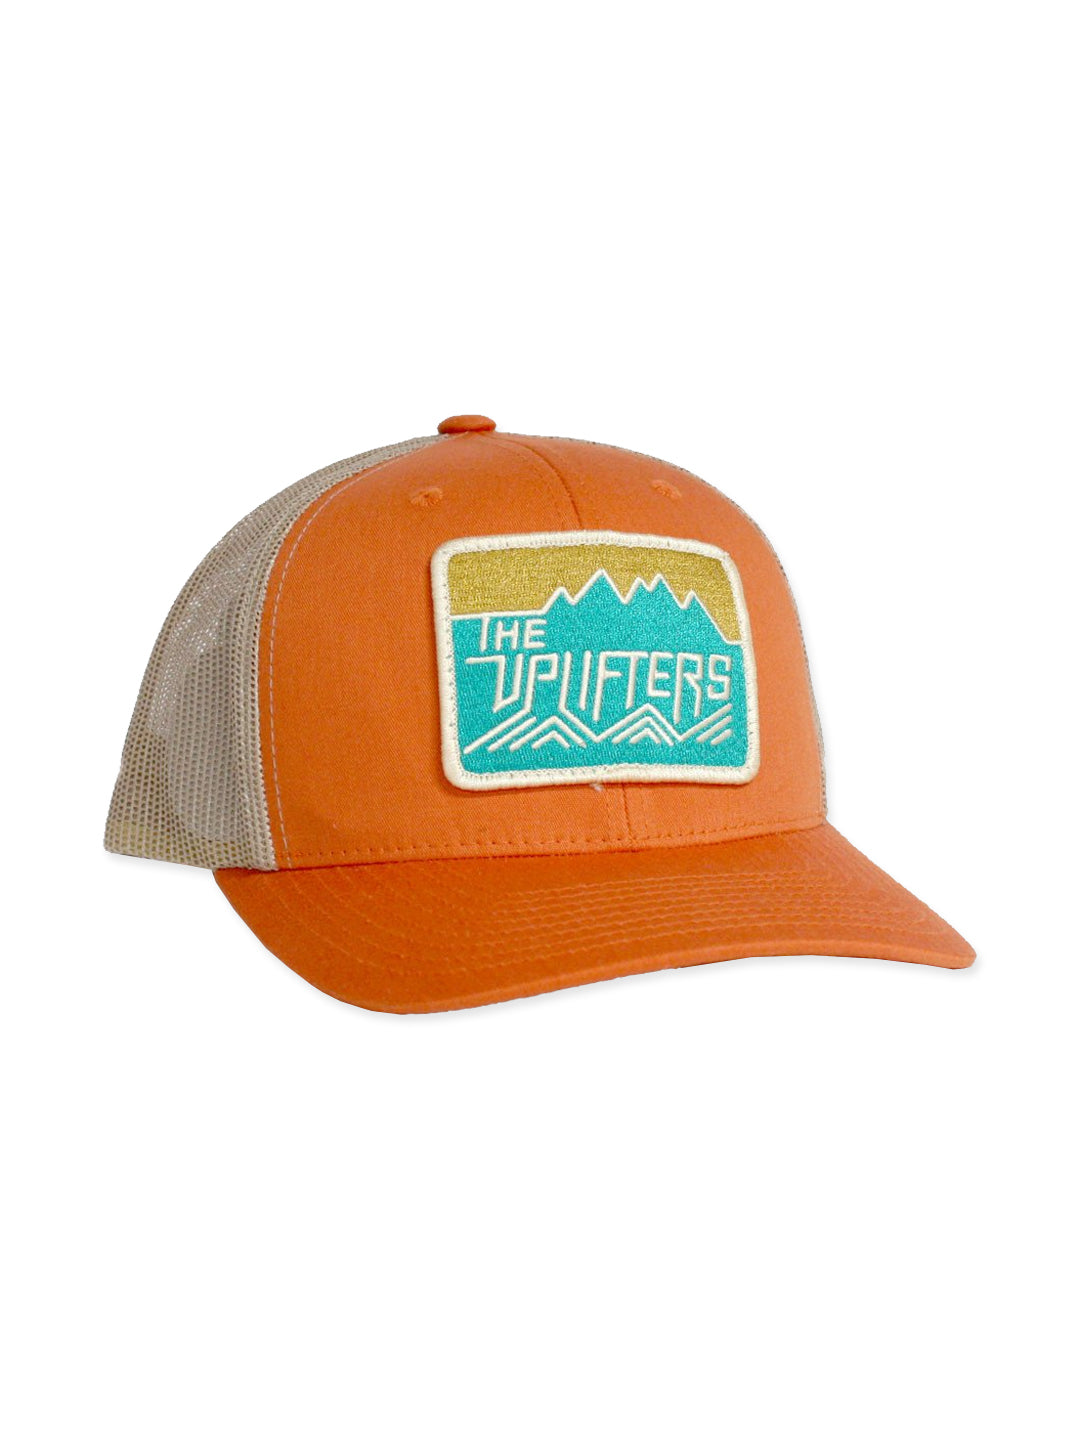 Classic Uplifters Patch Hat in Orange